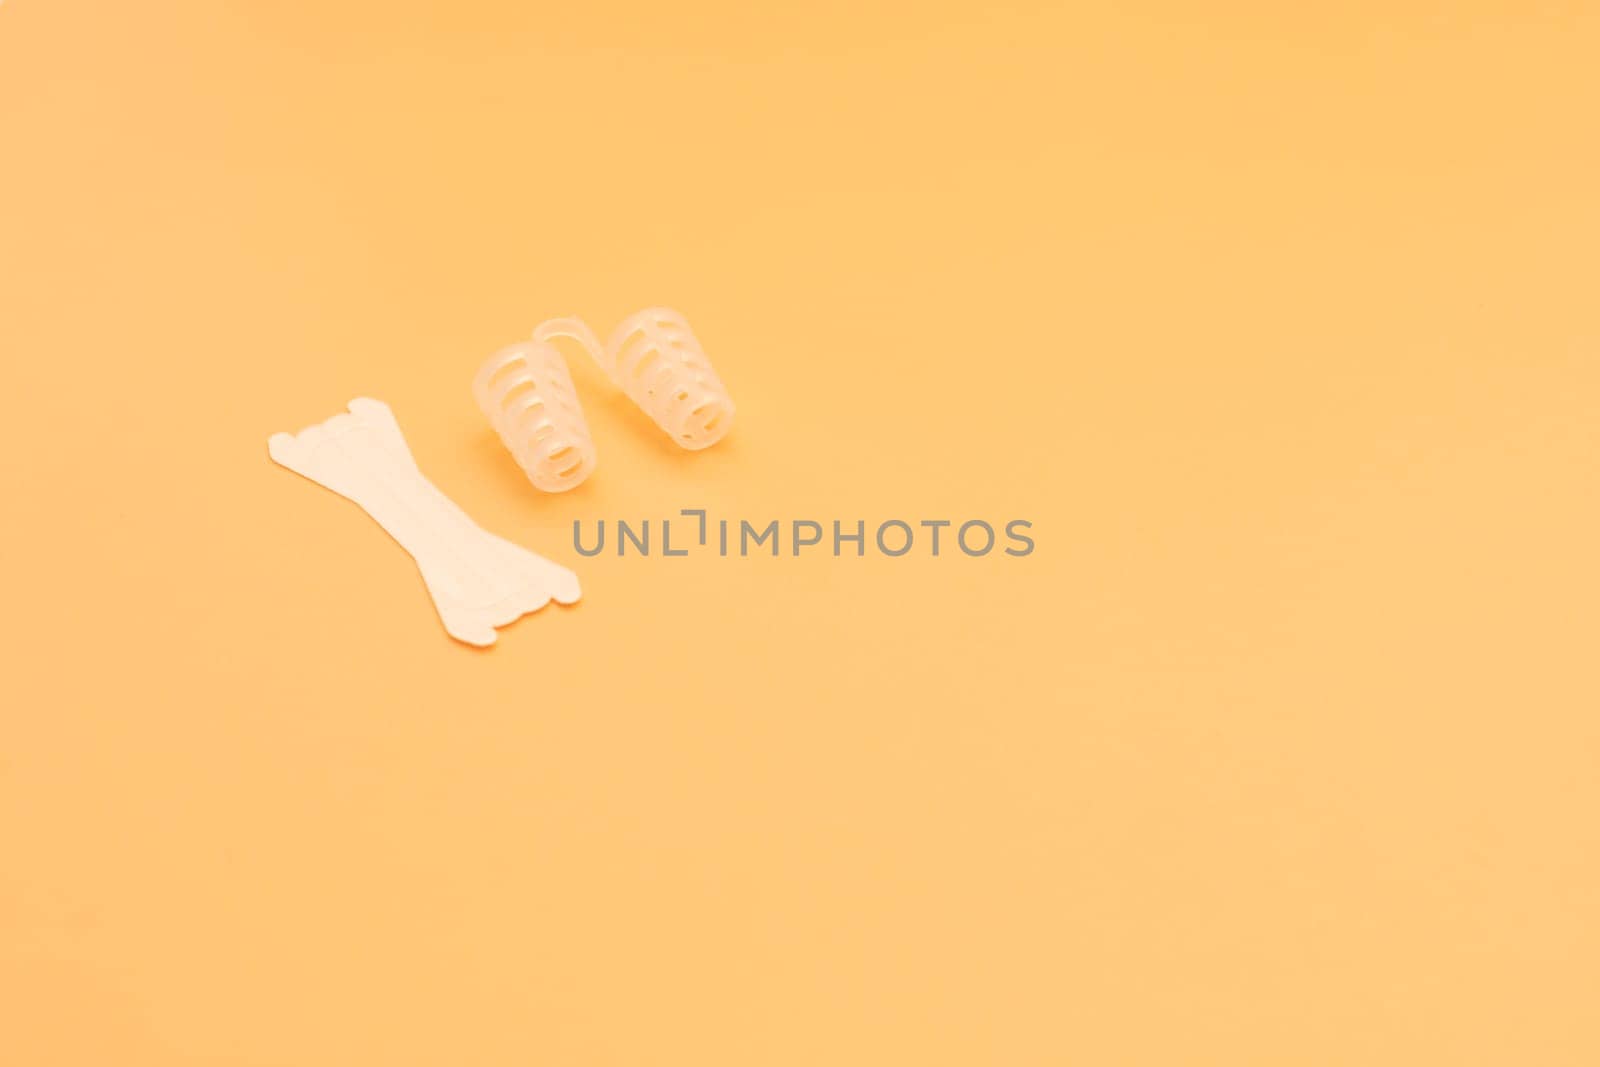 Mockup Anti Snoring Device. Nose Relief Nasal Dilator and White Nasal Strip on Peach Yellow Background, Sleeping Apnea Solution for Nasal Breathers, Snoring Problem. Space For Text Horizontal Plane